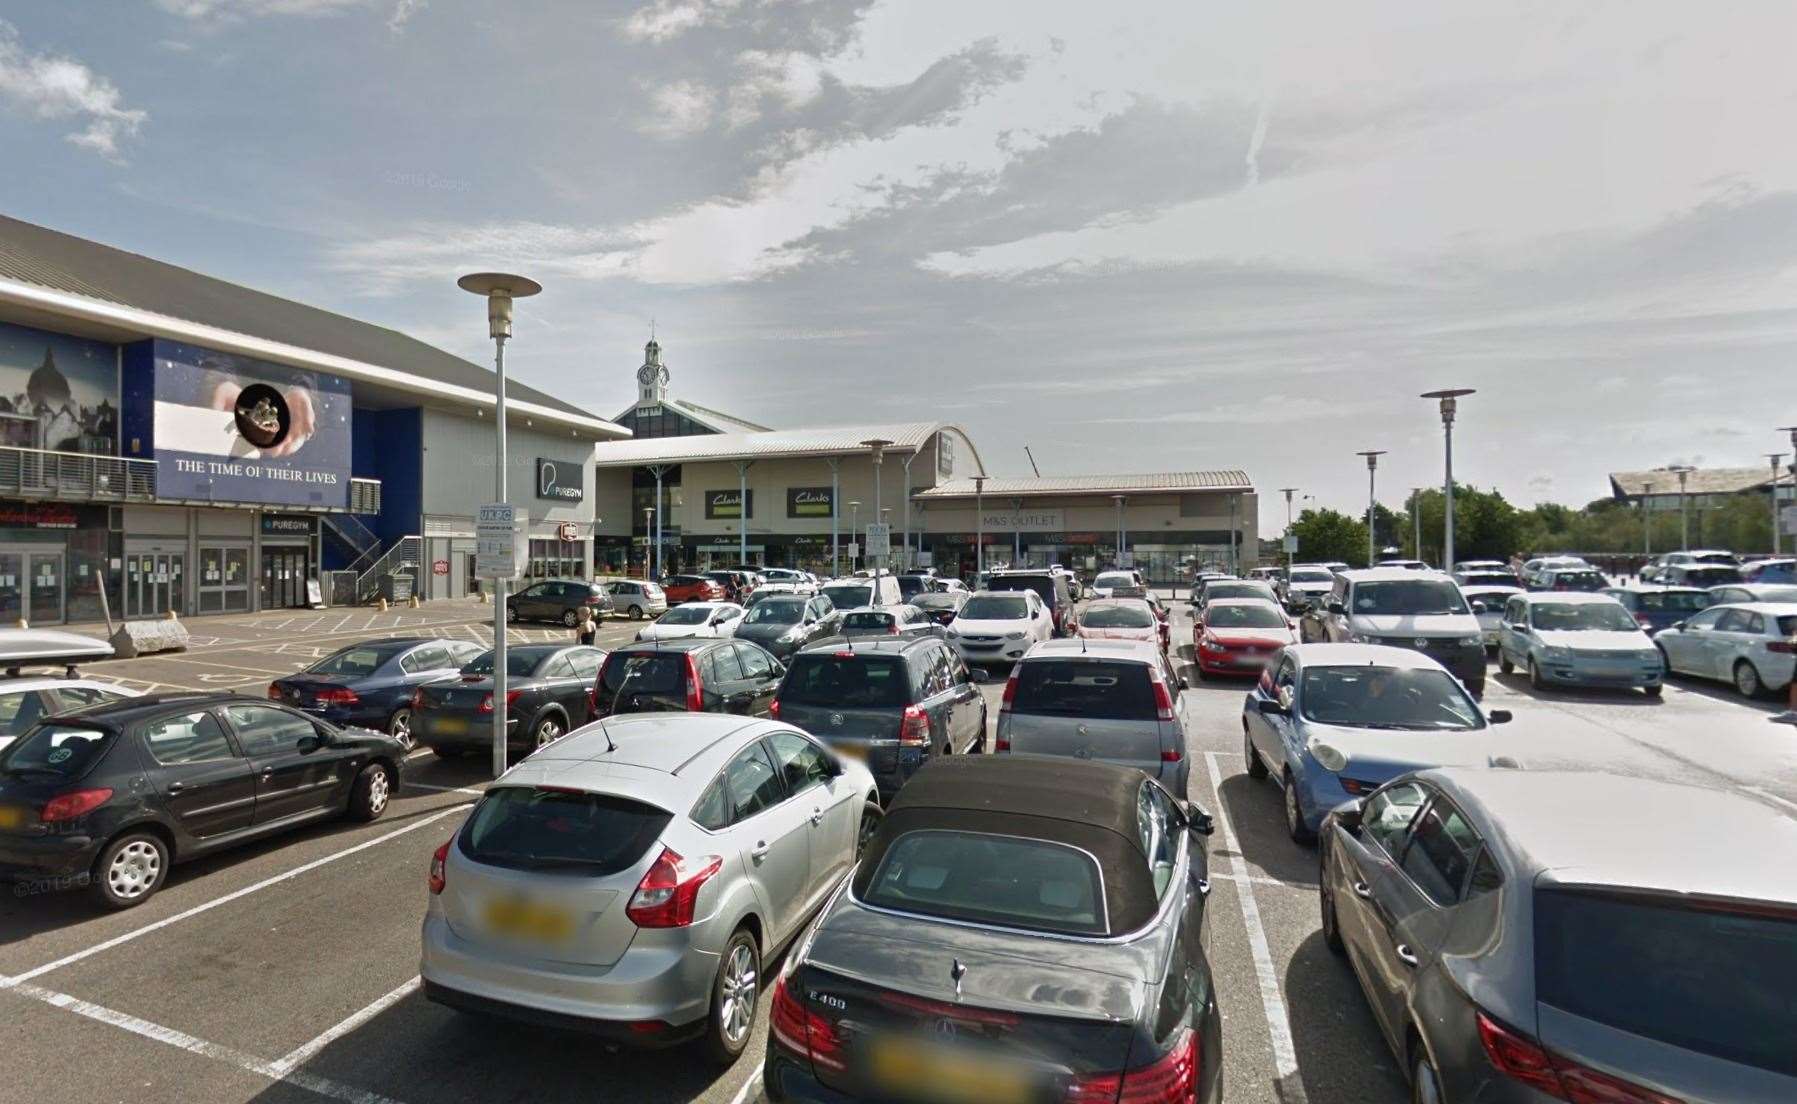 Chatham Dockside Outlet is another area that will be patrolled. Picture: Google